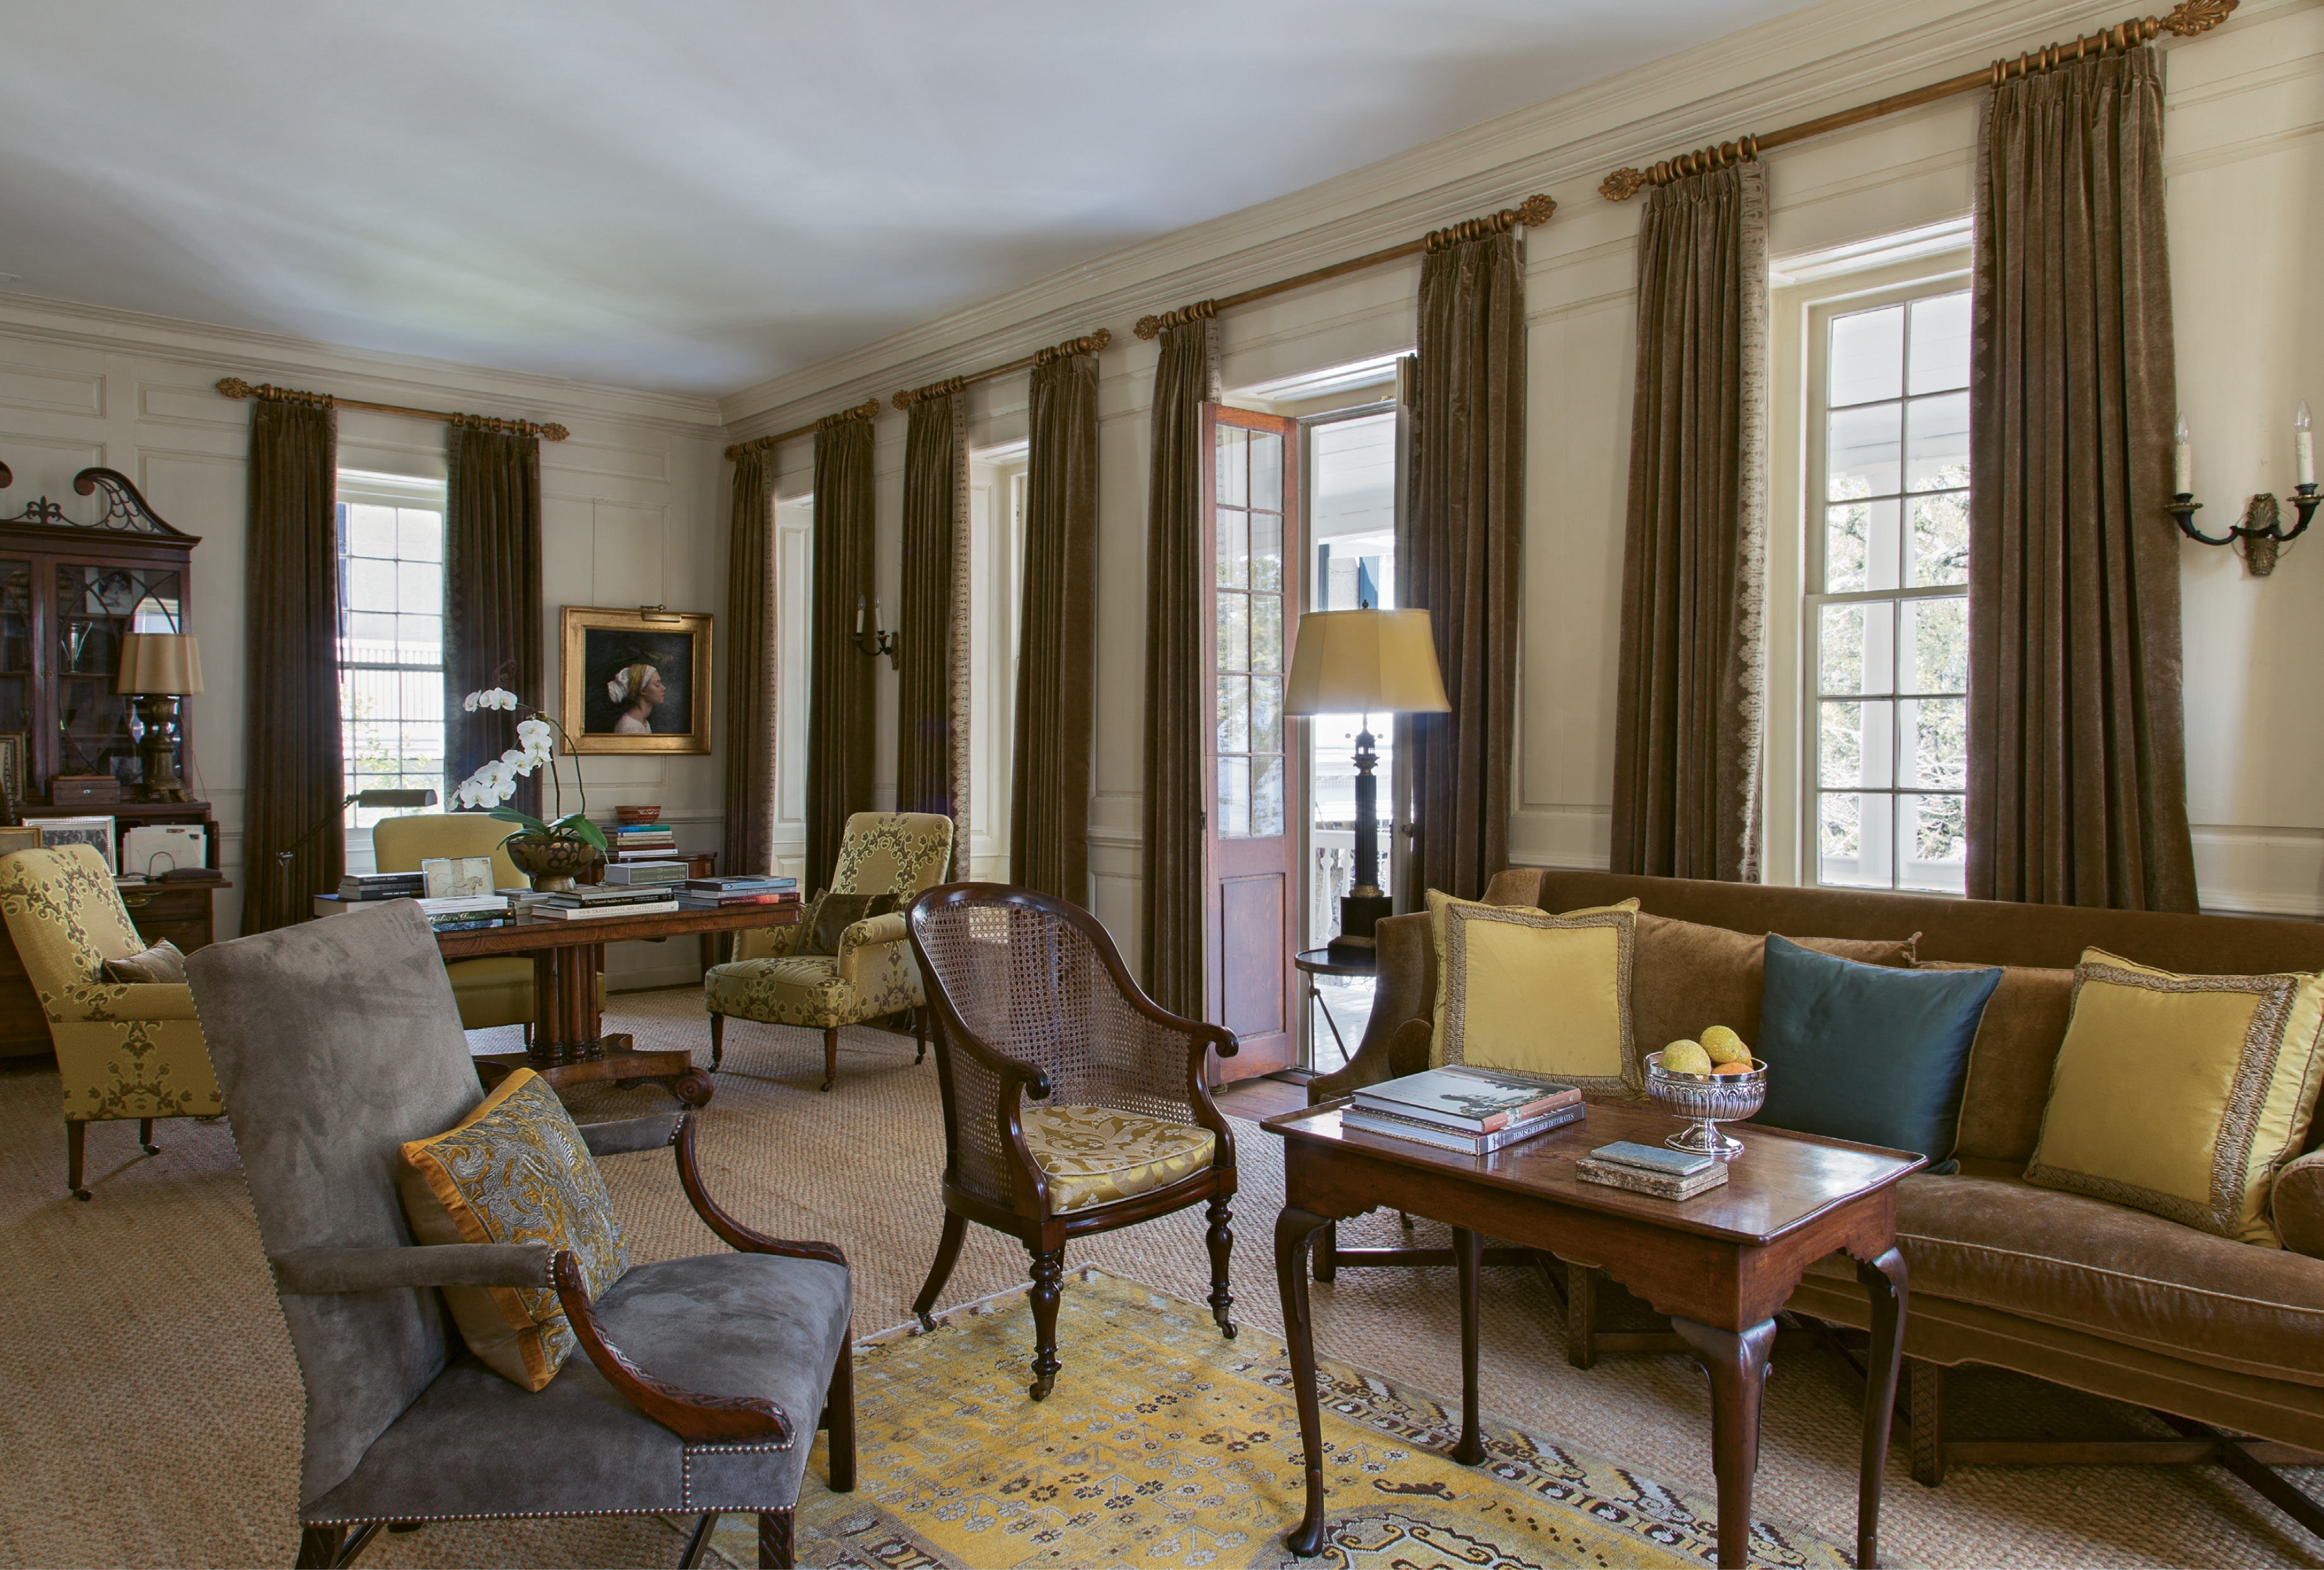 The upstairs drawing room is outfitted in a sophisticated palette of rich browns and yellows. An inviting mix of textures, from an antique Khotan rug atop seagrass to suede upholstery on the 18th-century armchair, adds visual interest.